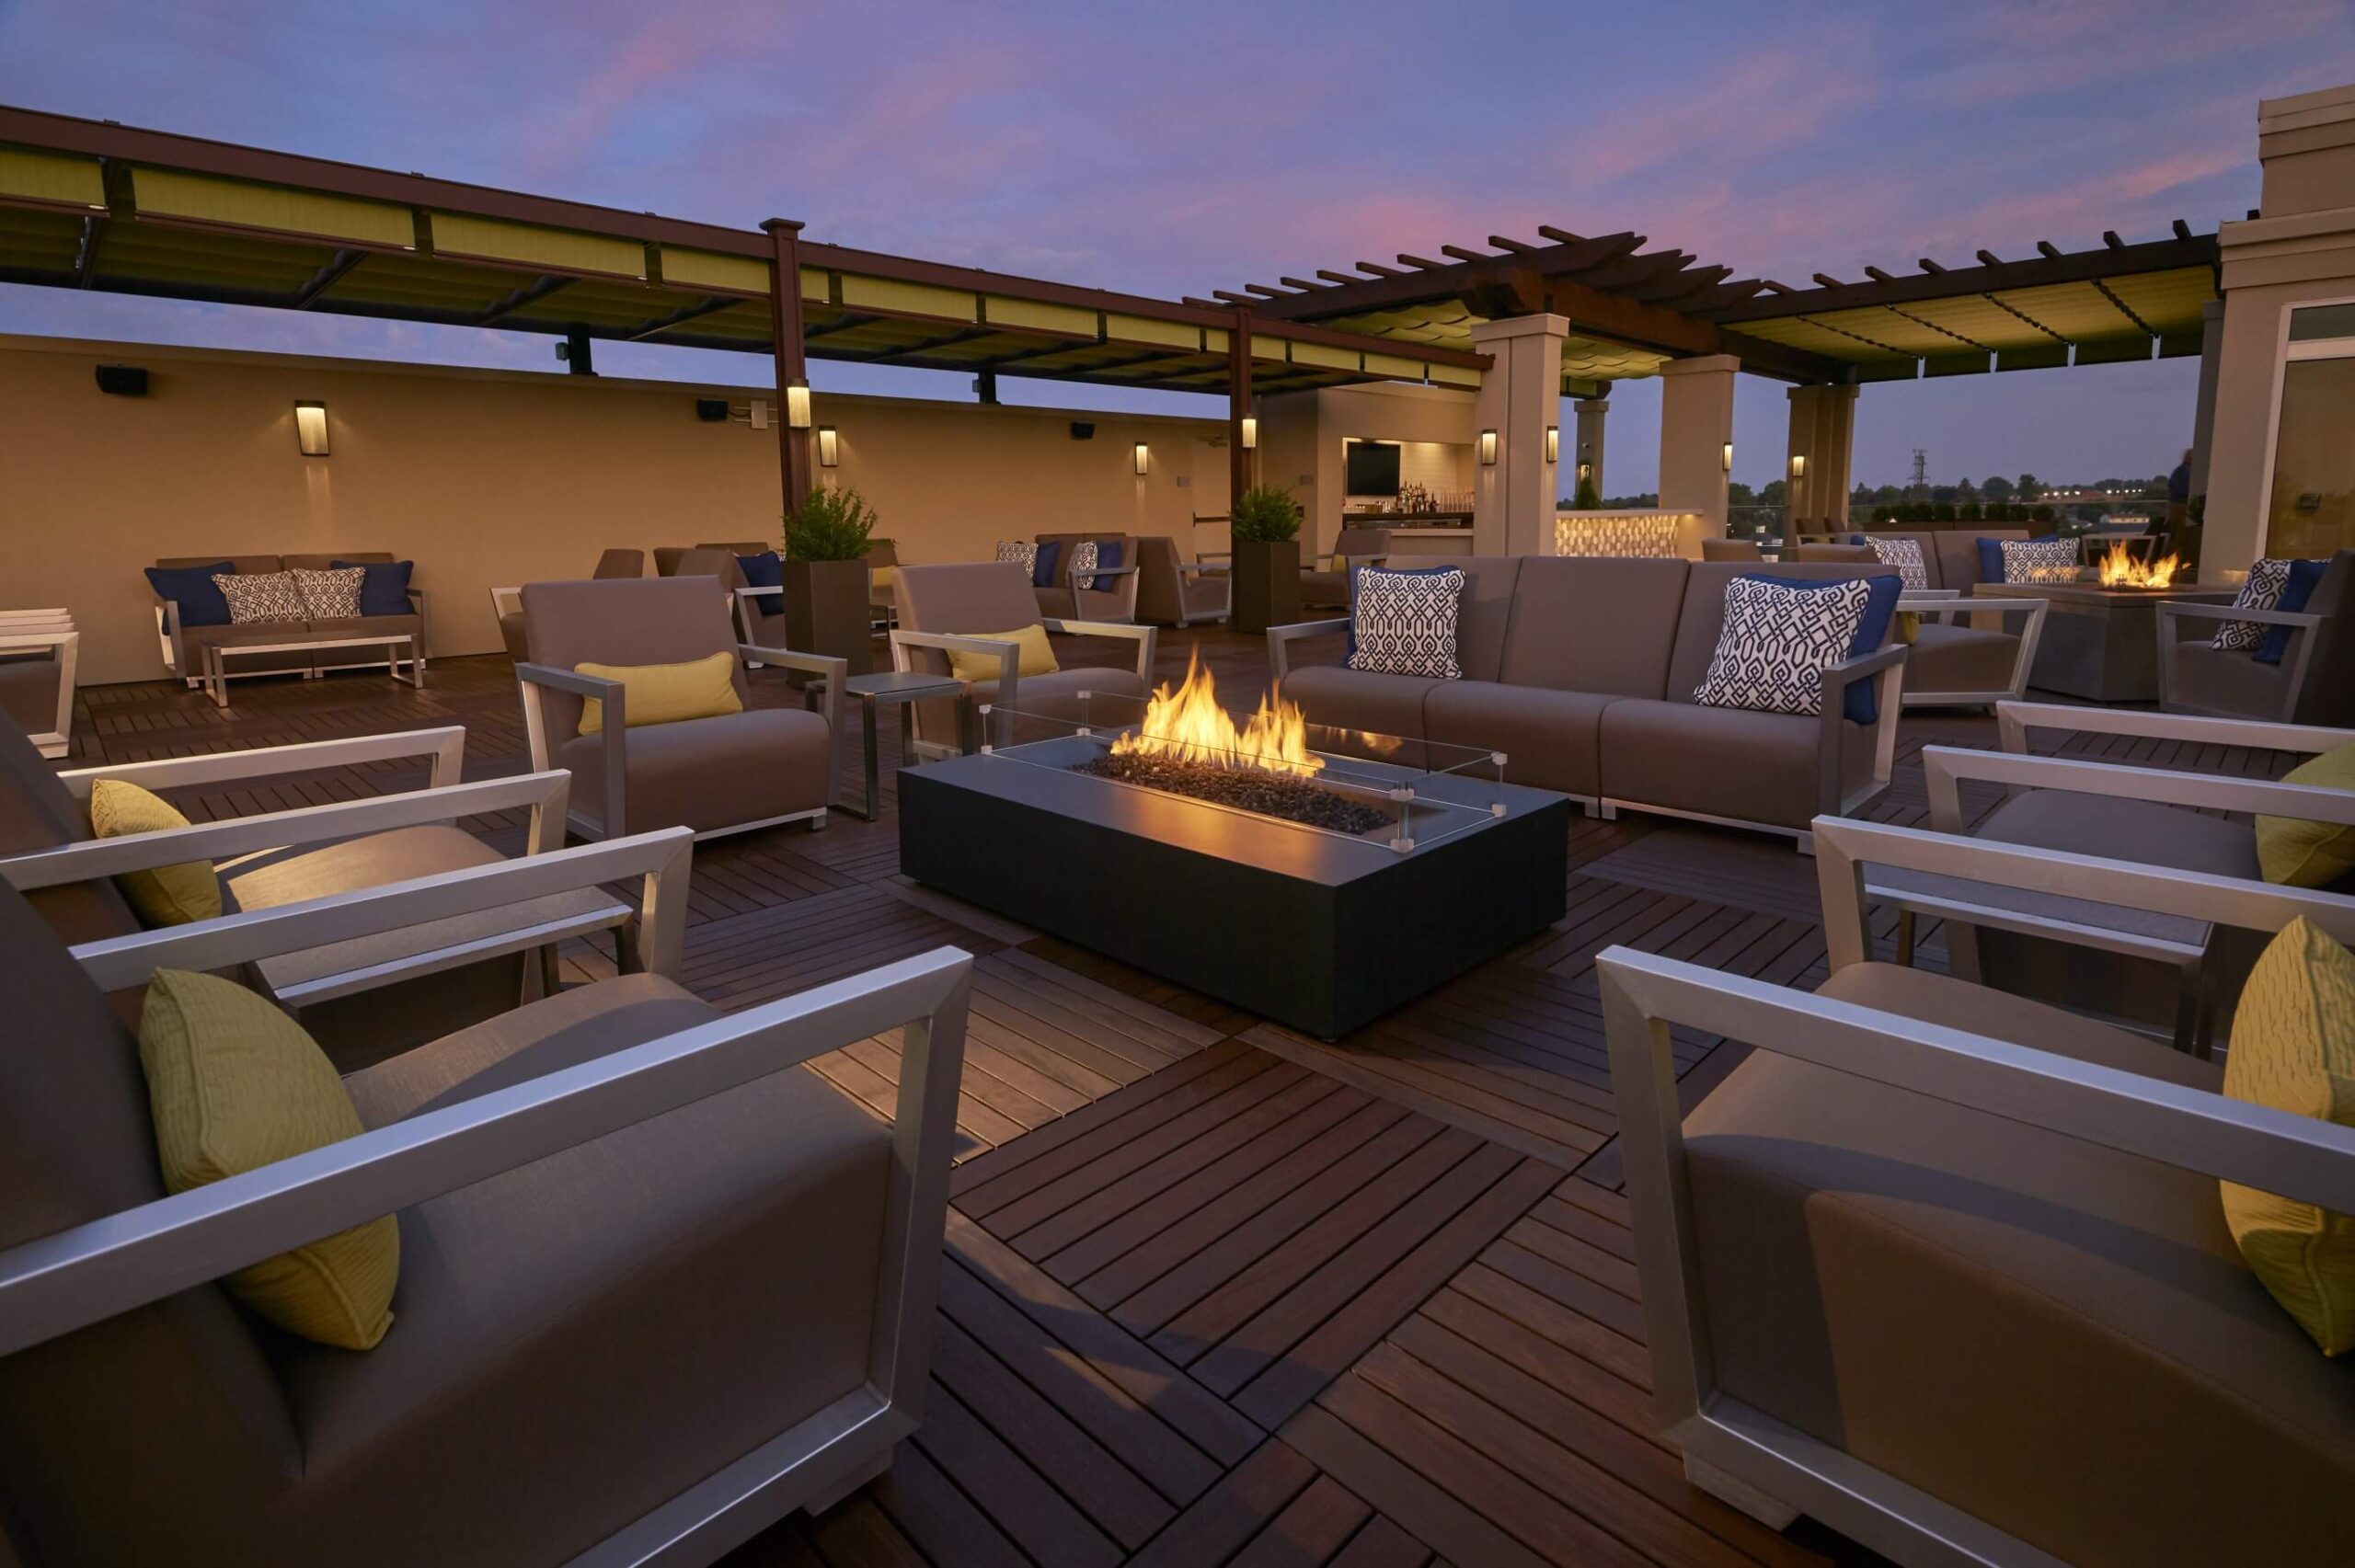 A serene patio oasis at dusk in a retirement community, designed exclusively for seniors 55+.